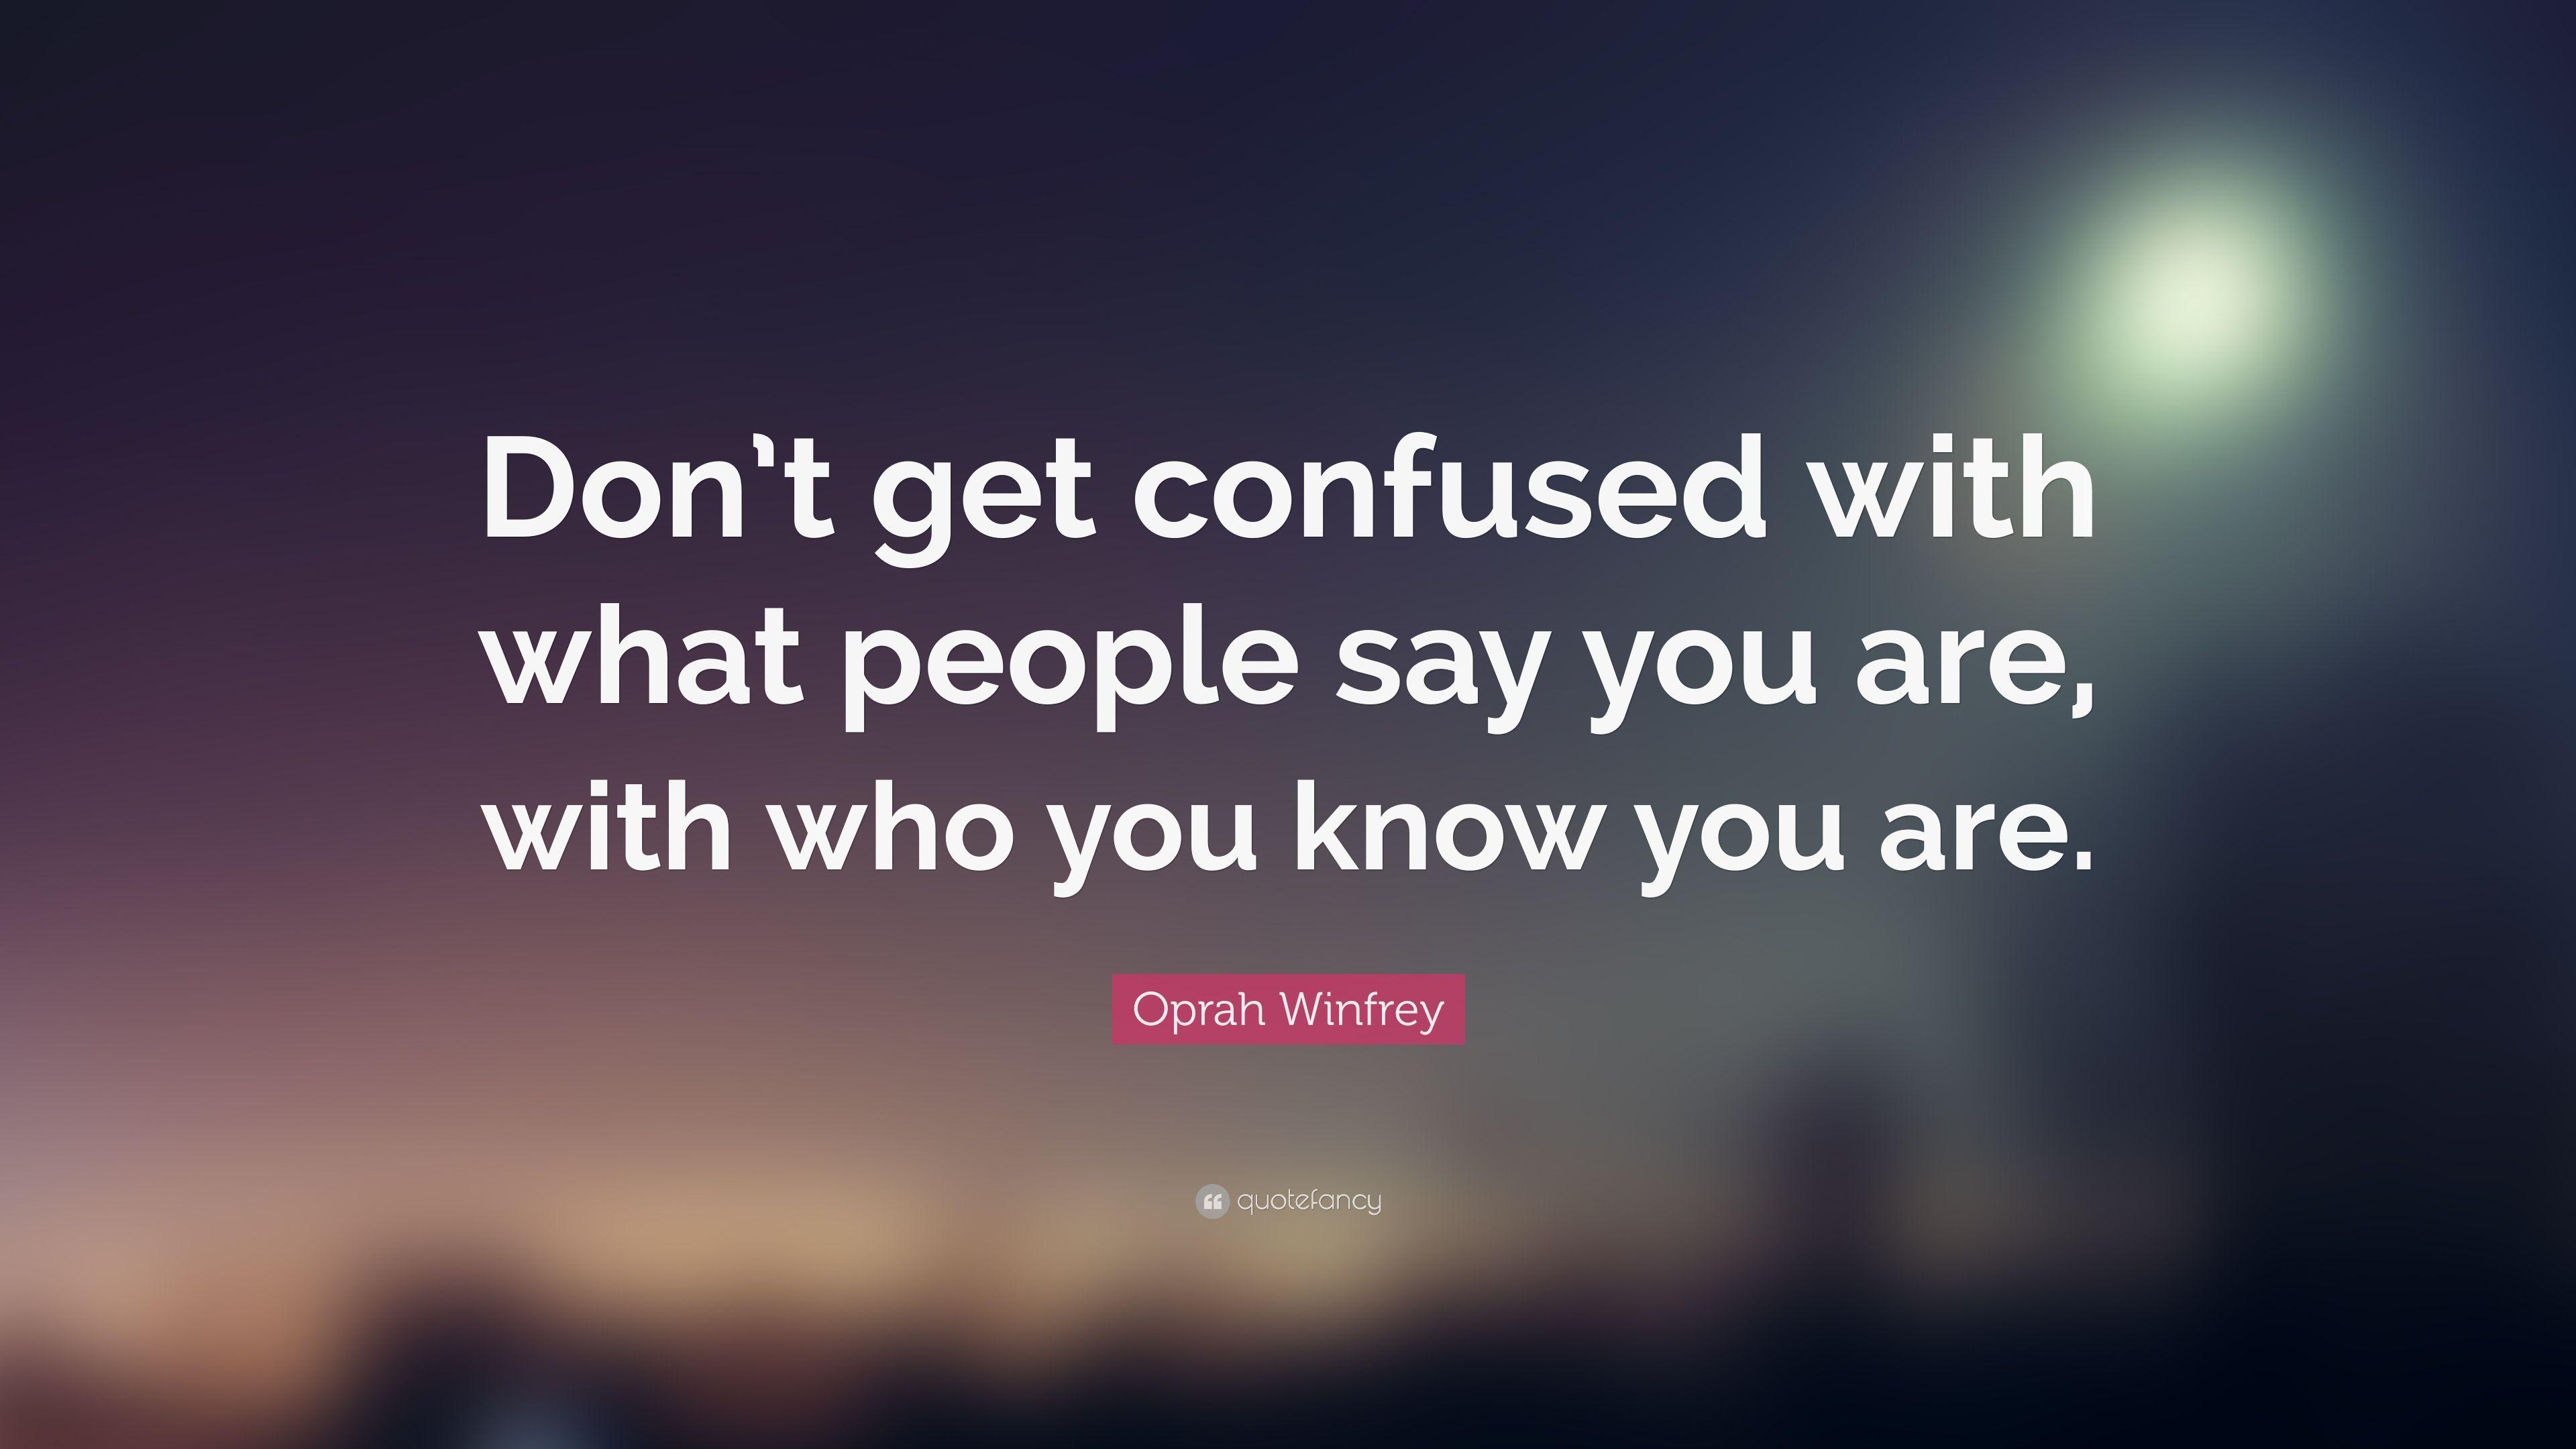 Oprah Winfrey Quote: “Don't get confused with what people say you